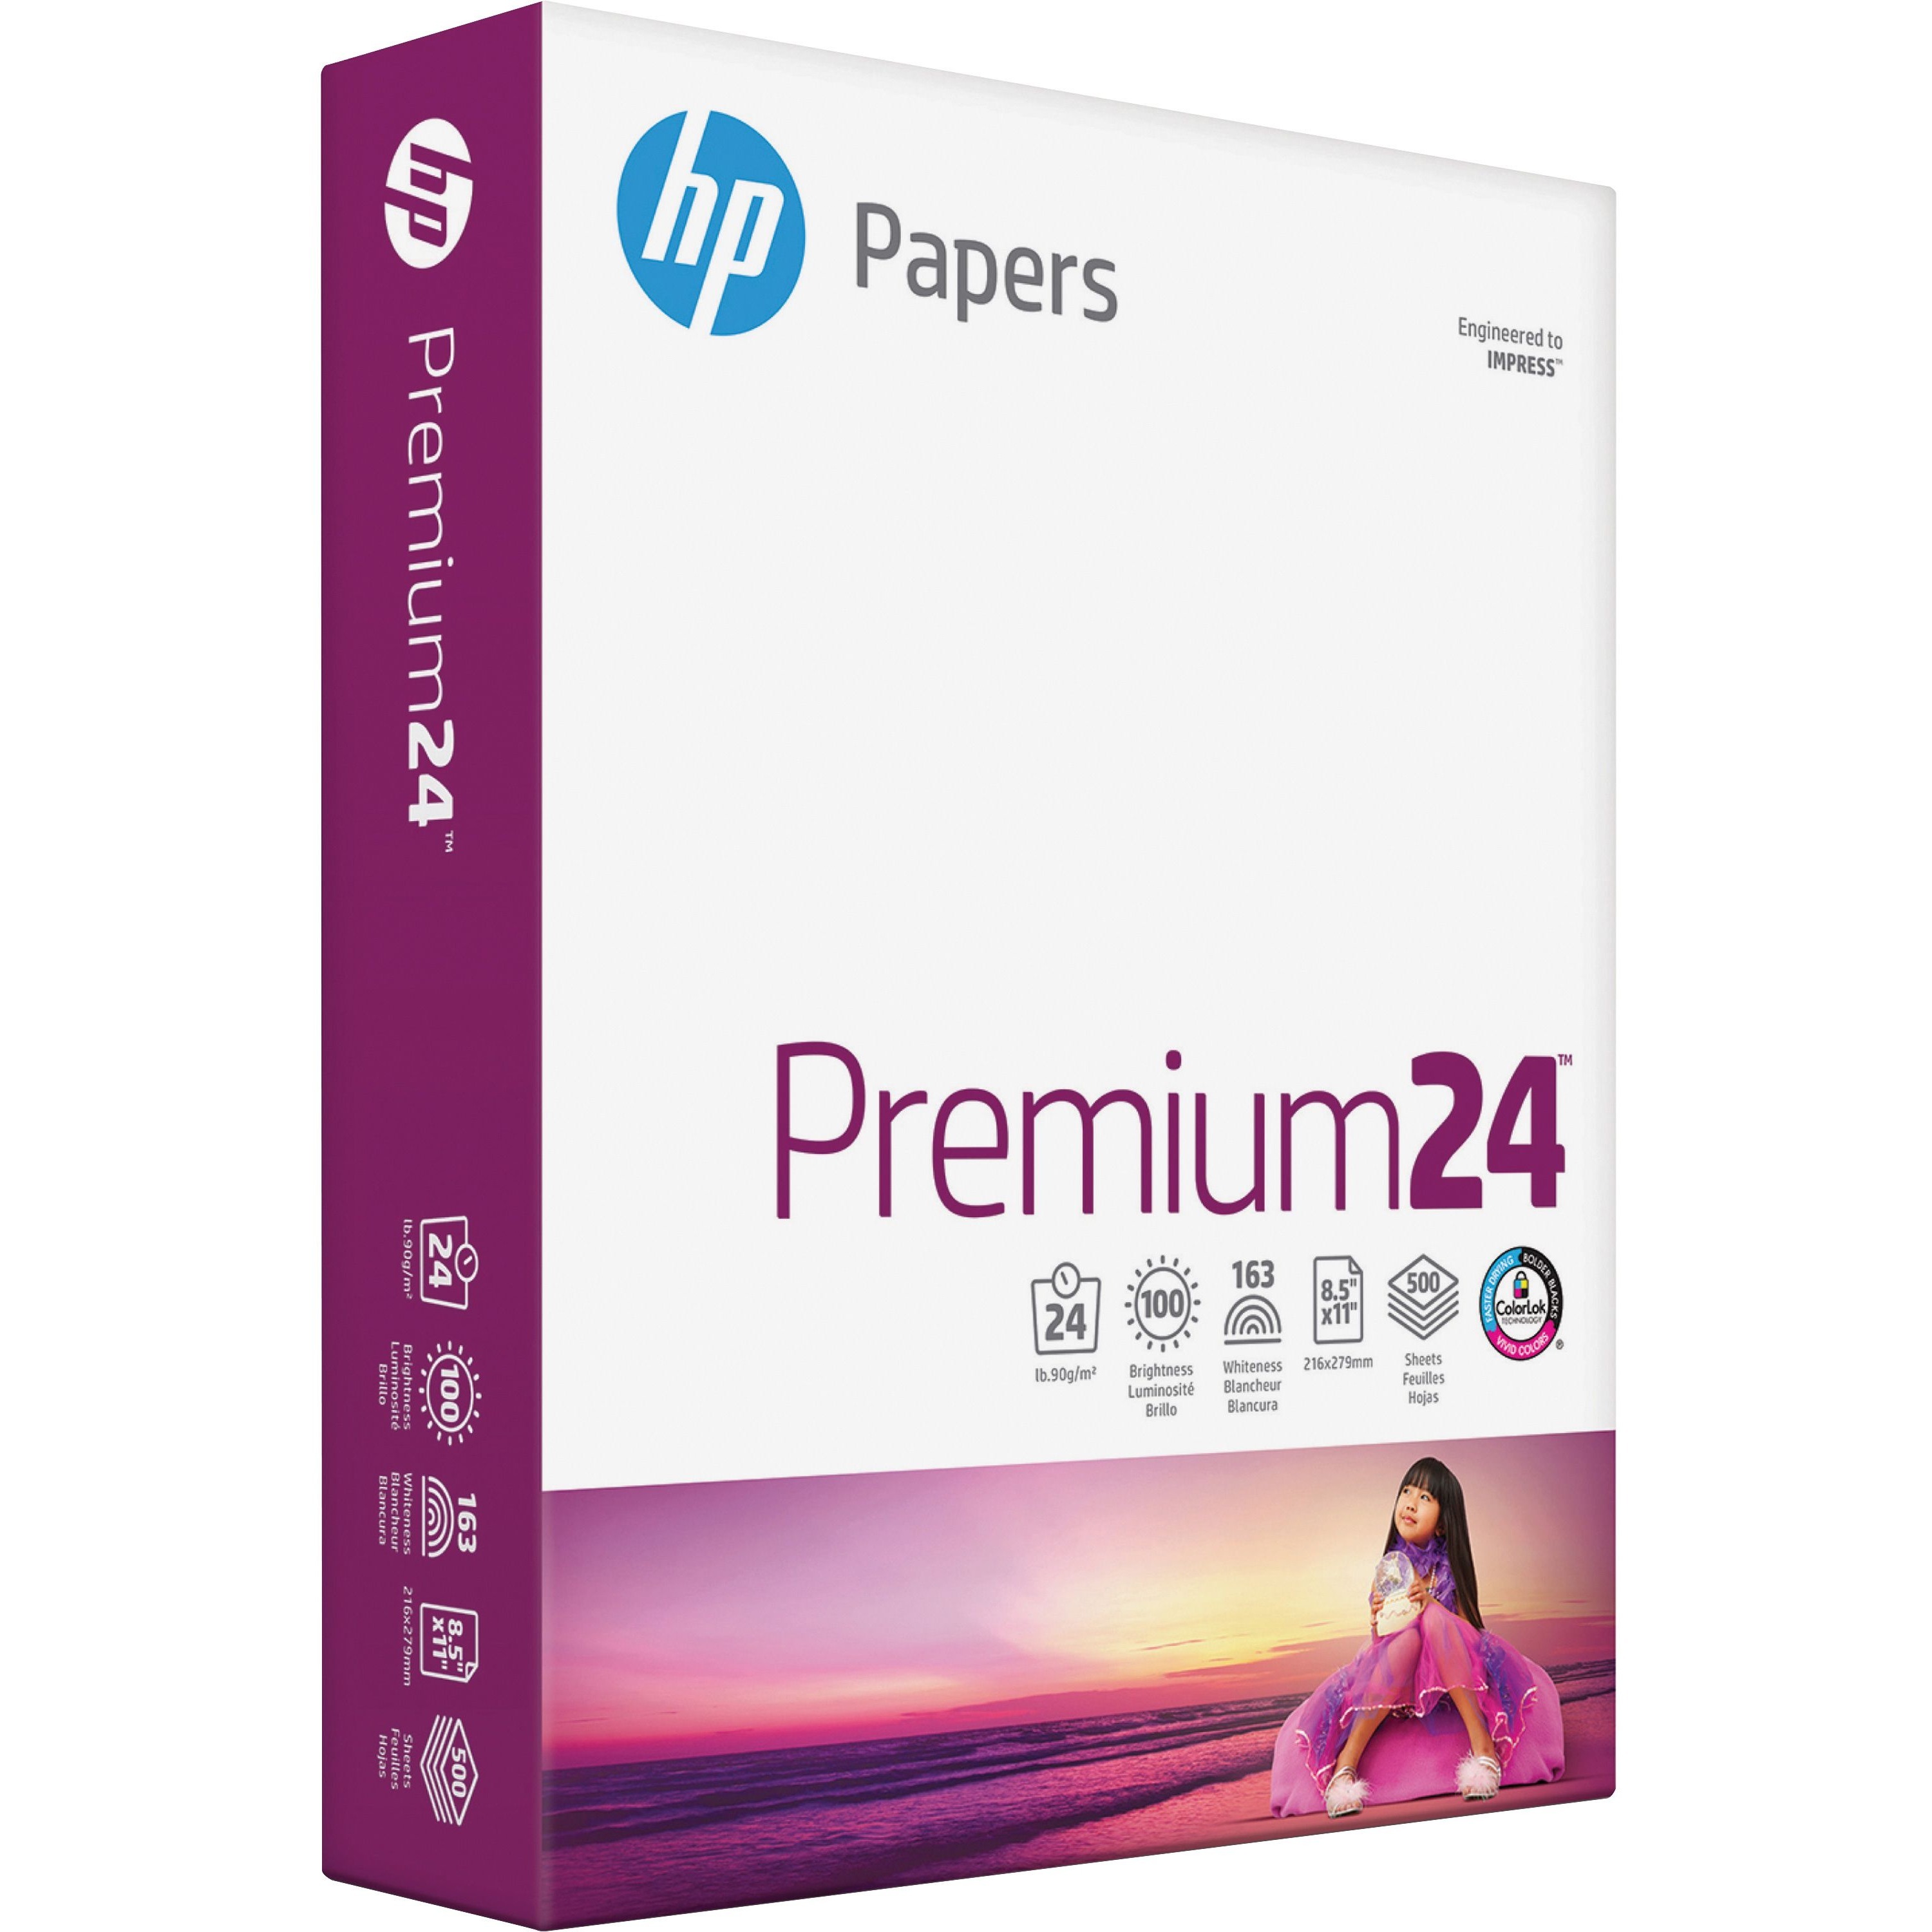 Home - HP Papers